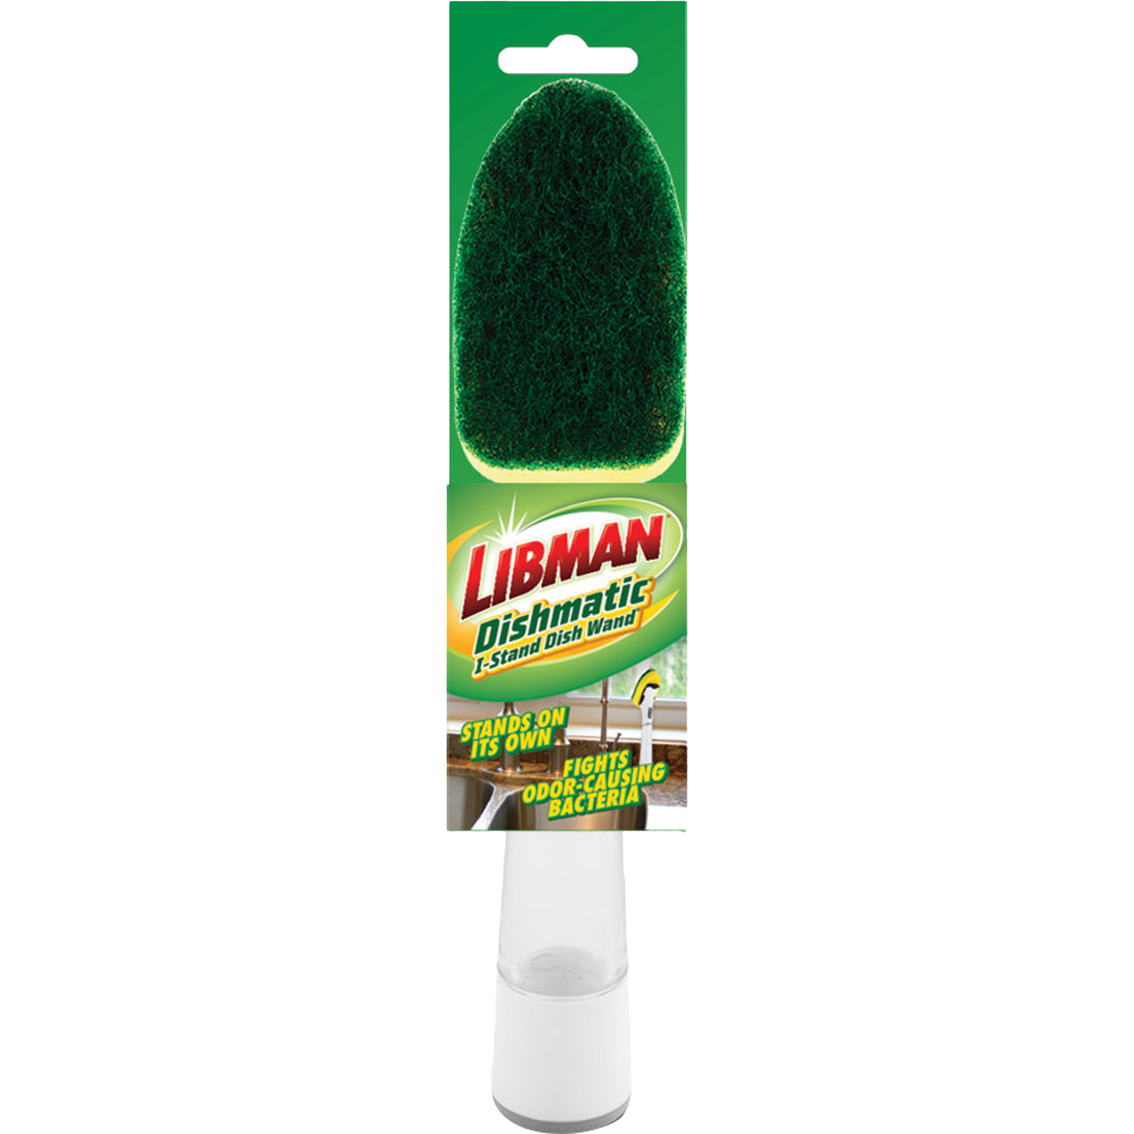 Libman Dishmatic I-stand Dish Wand, Dish Detergents, Household